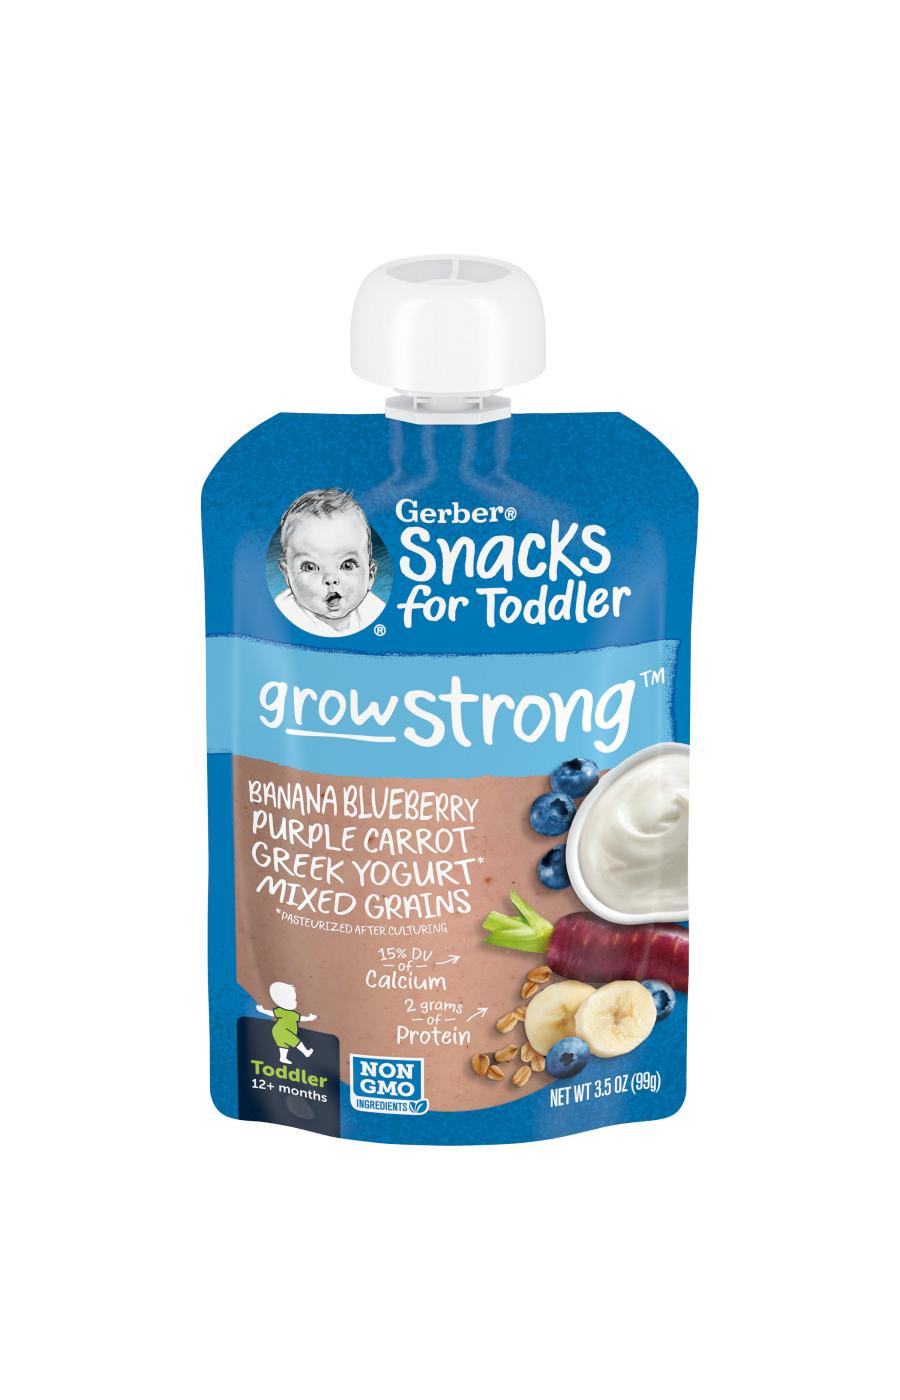 Gerber Snacks for Toddler Grow Strong Pouch - Banana Blueberry Purple Carrot Greek Yogurt & Mixed Grains; image 1 of 8